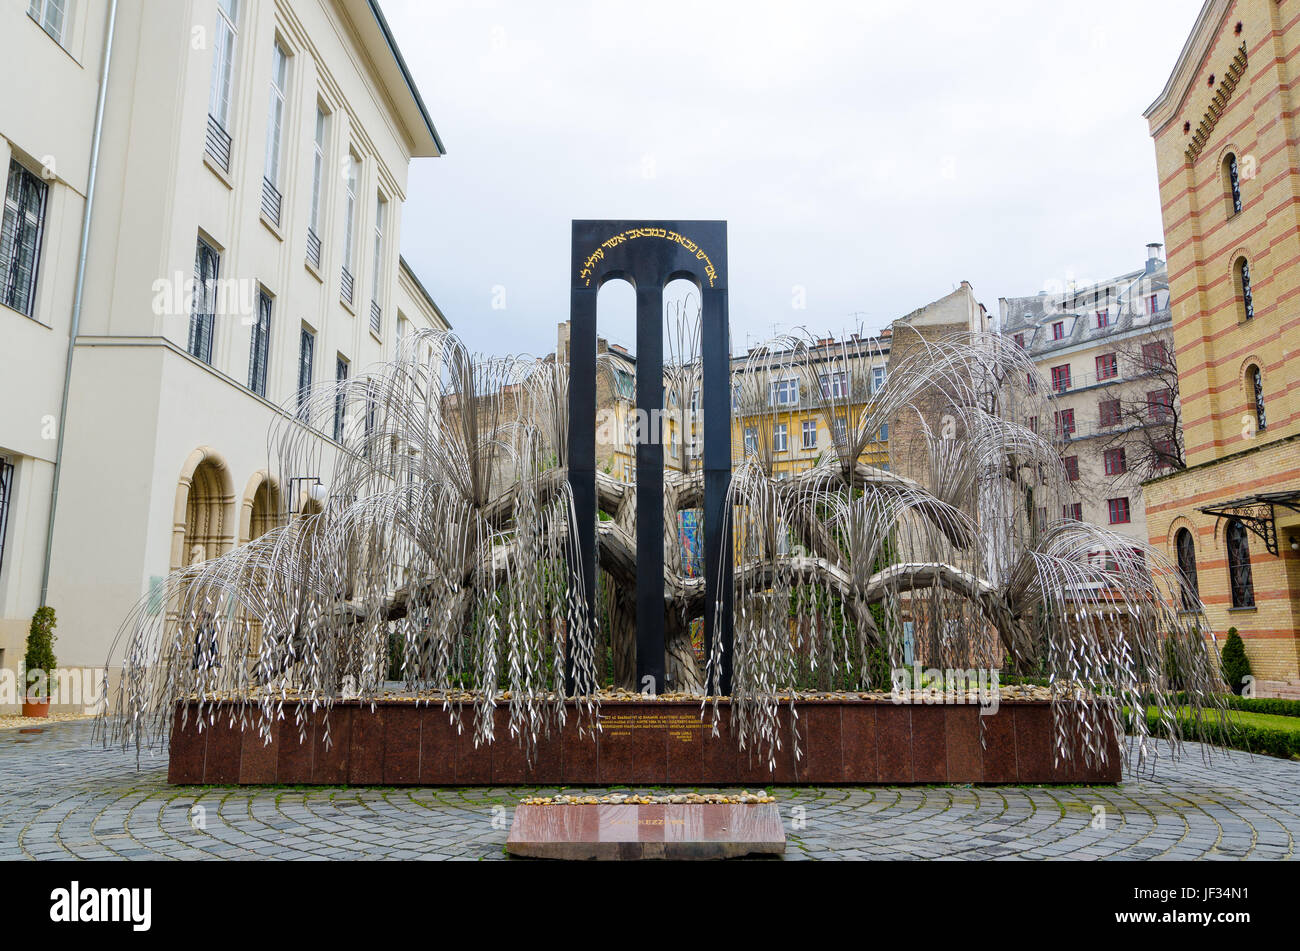 BUDAPEST, HUNGARY - FEBRUARY 21, 2016: Tree of Life - monument to the victims of the Holocaust was opened in 1990 in Budapest, Hungary. The sculptor i Stock Photo